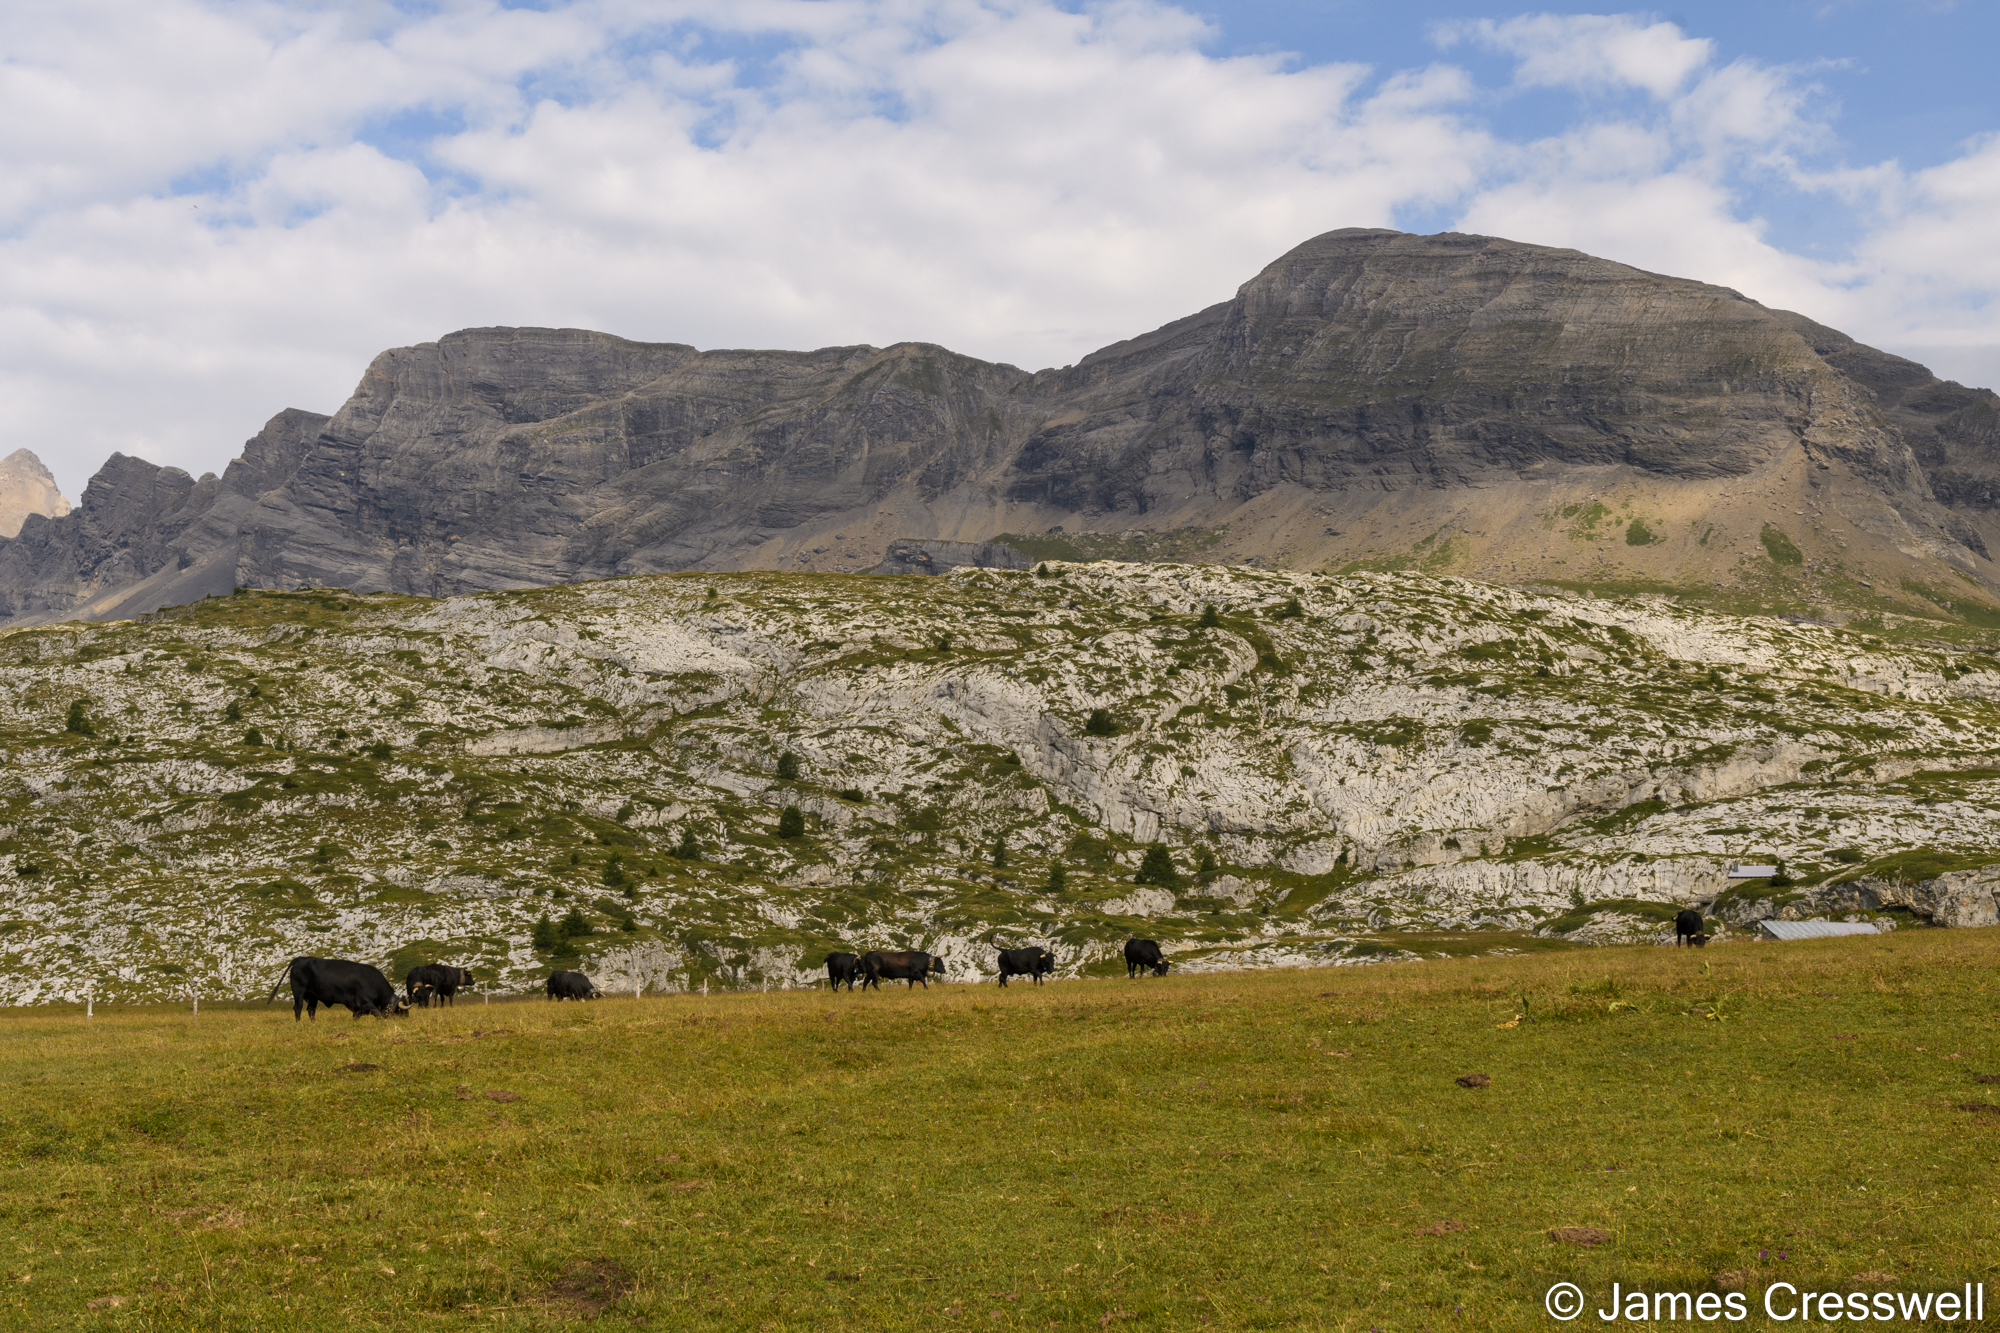 Cows in front of a rock outcrop with mountains in the background